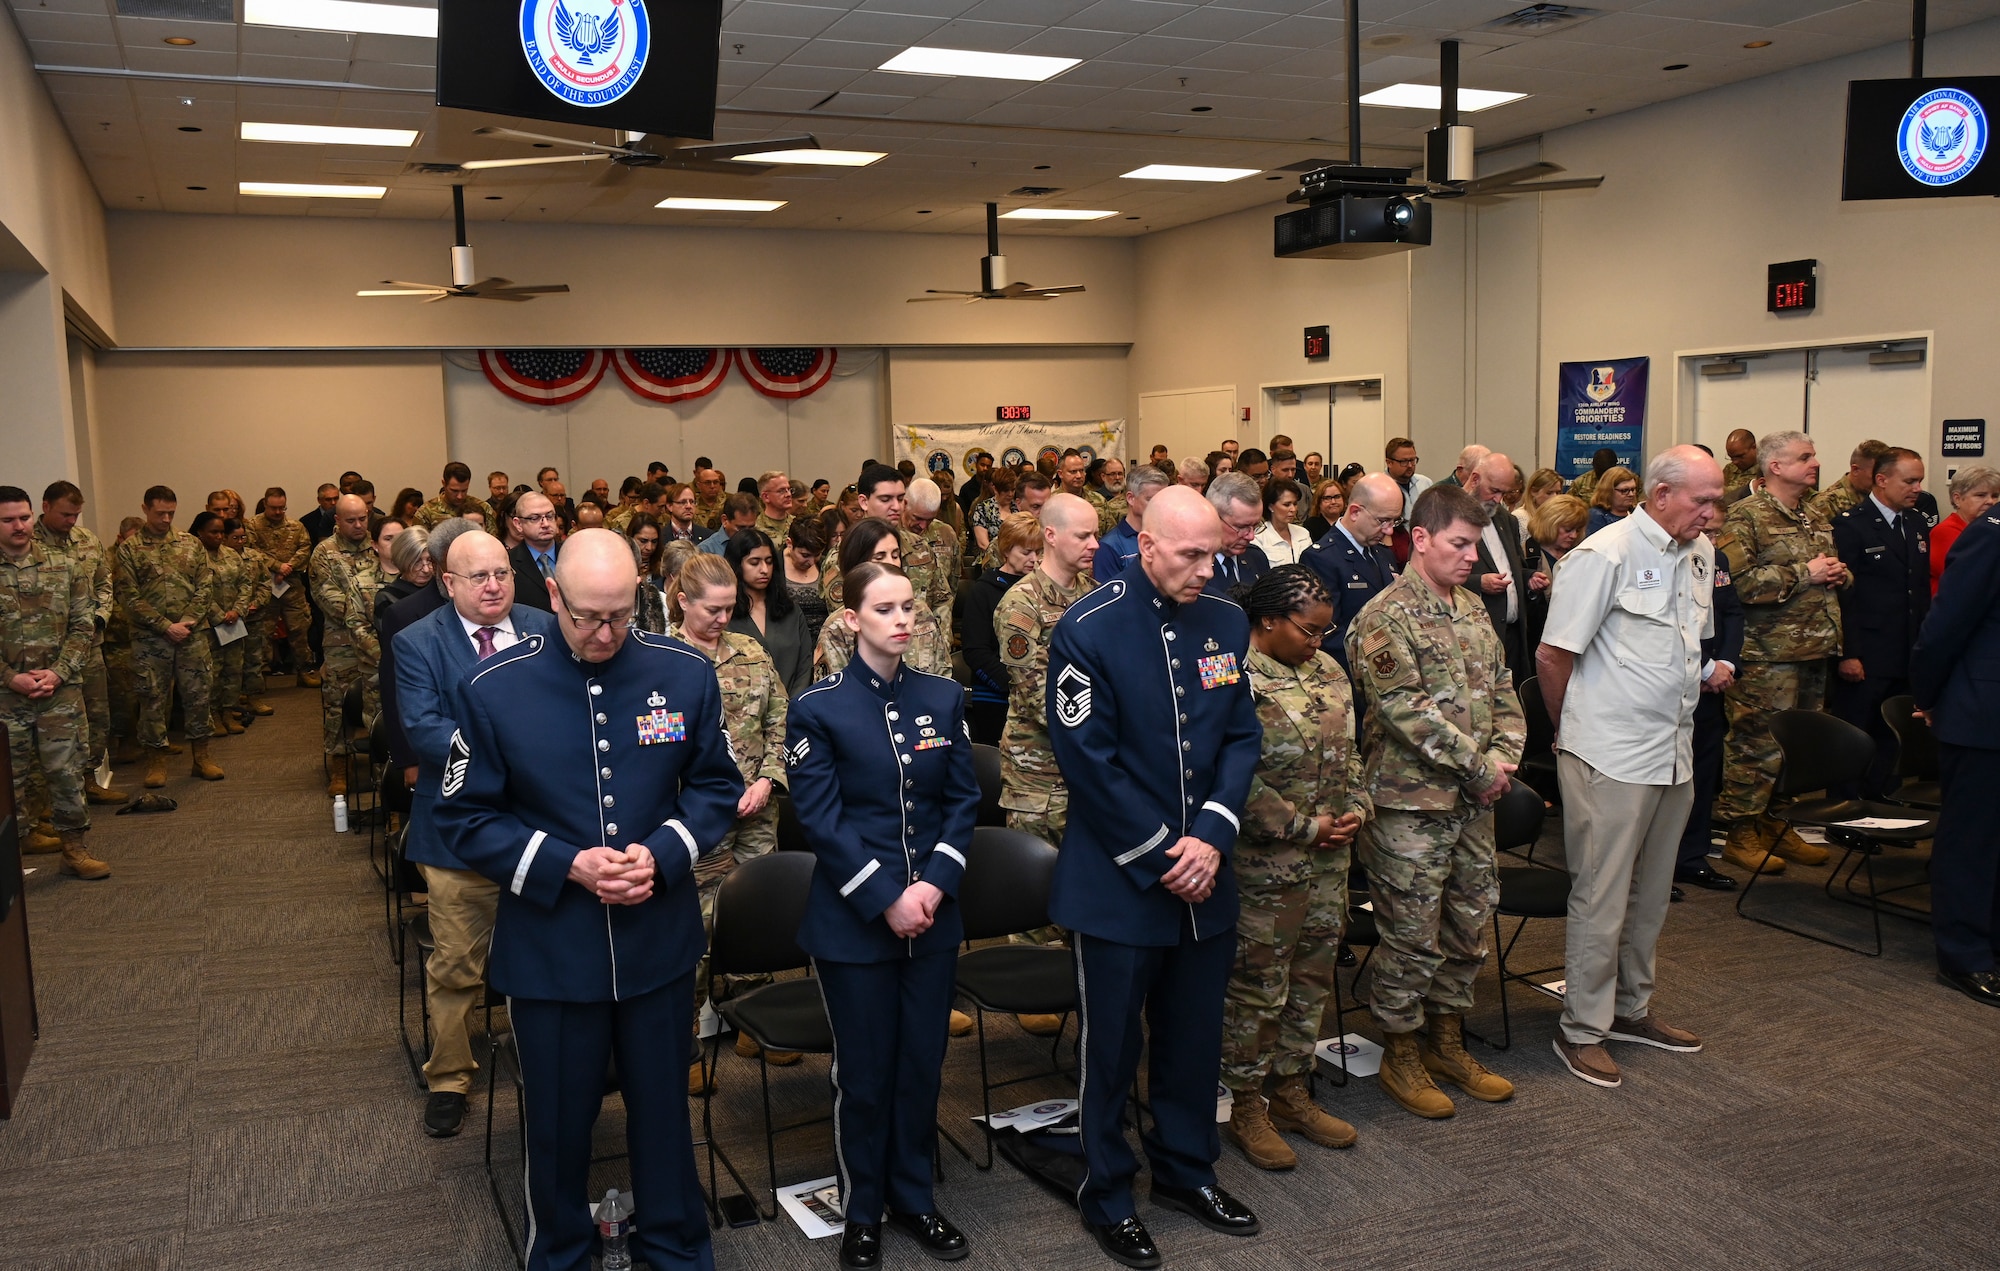 Overhead shot of standing Air Force members attending an indoors ceremony.